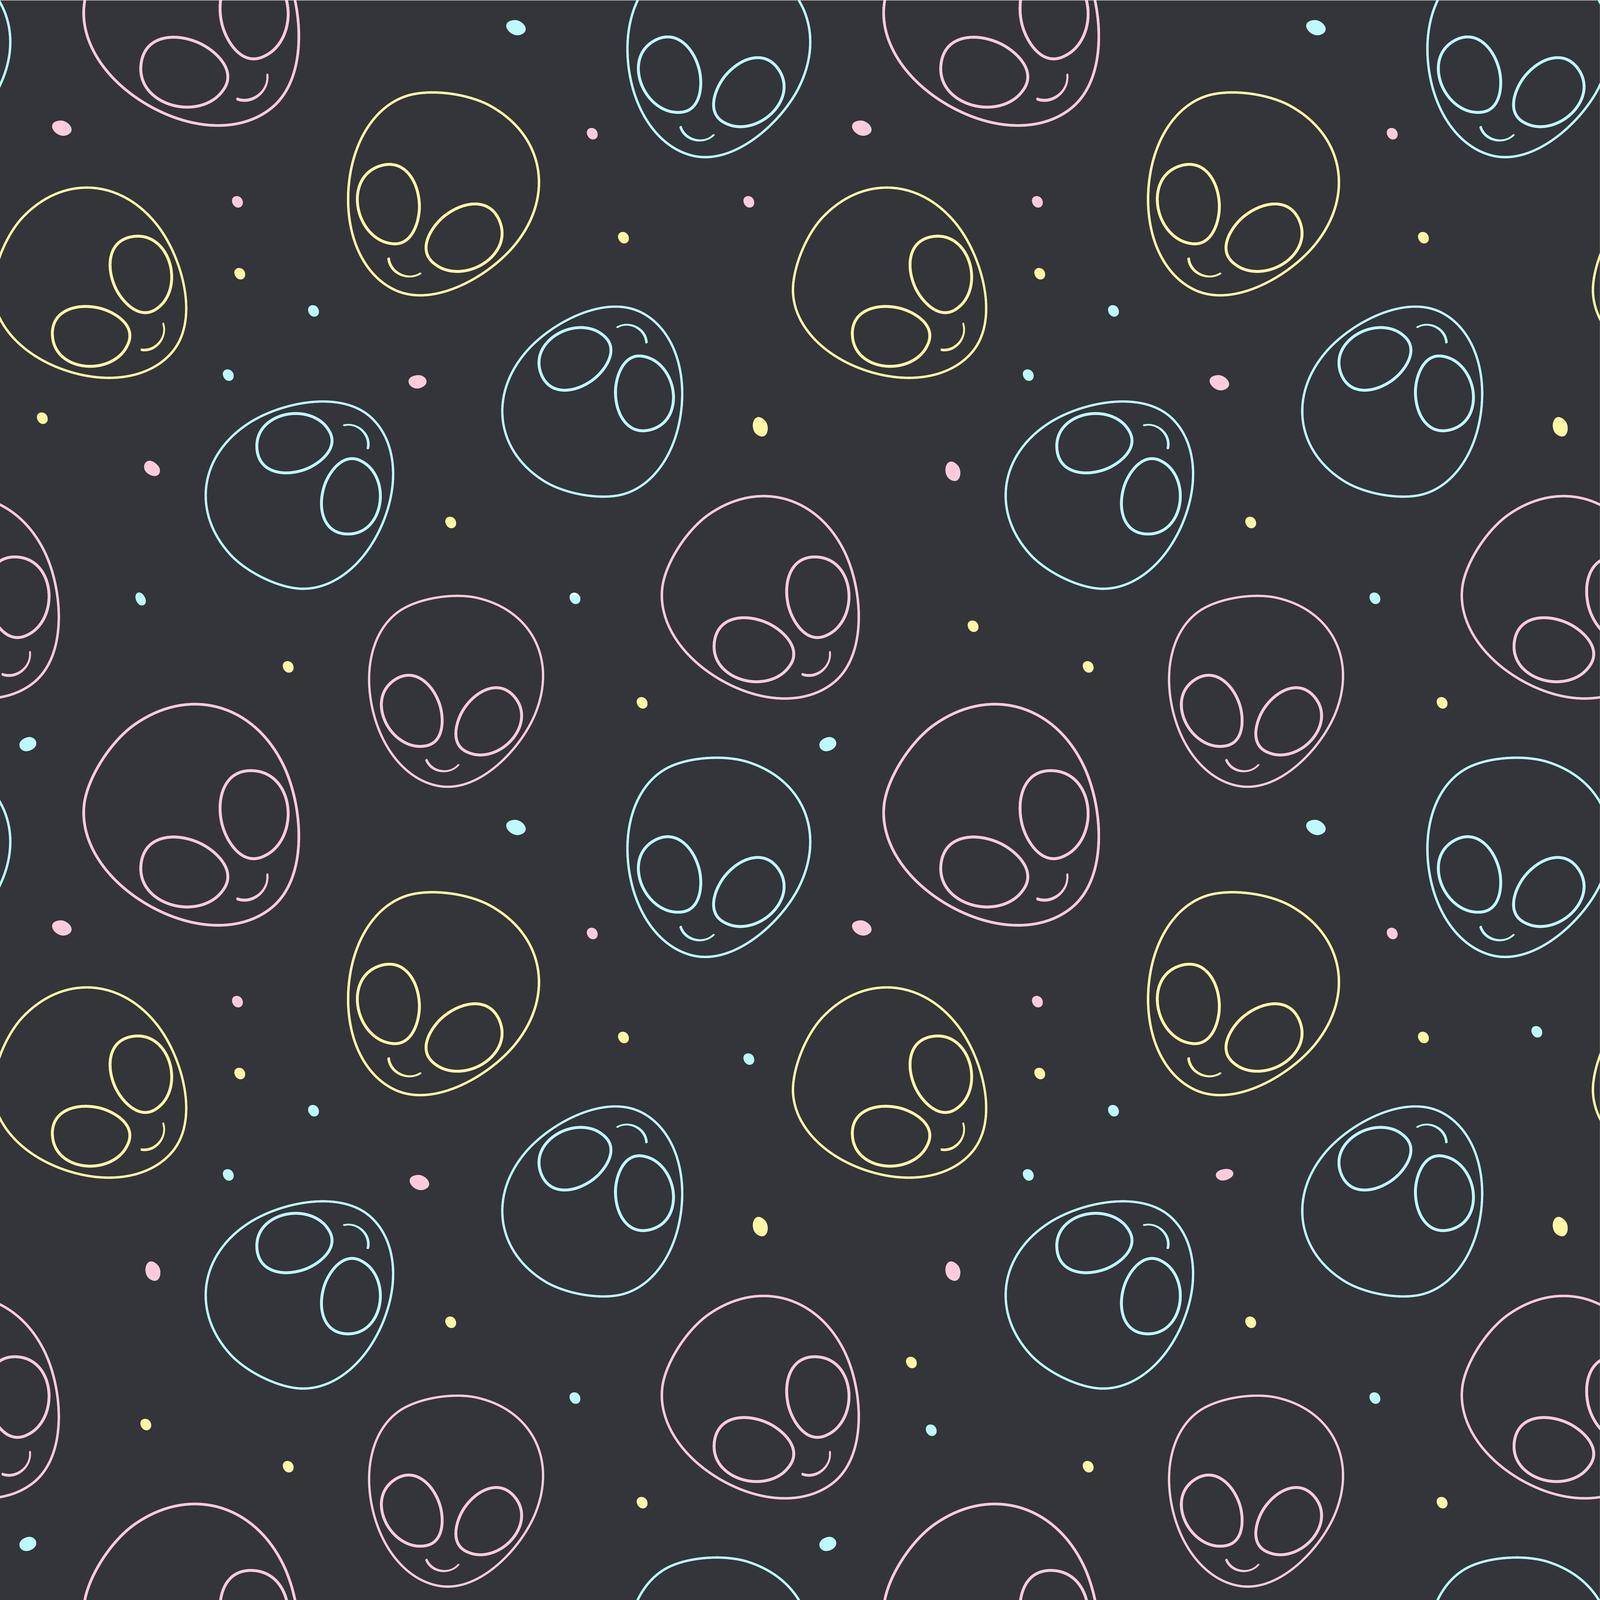 Aliens Seamless Tiling Background by apollocat